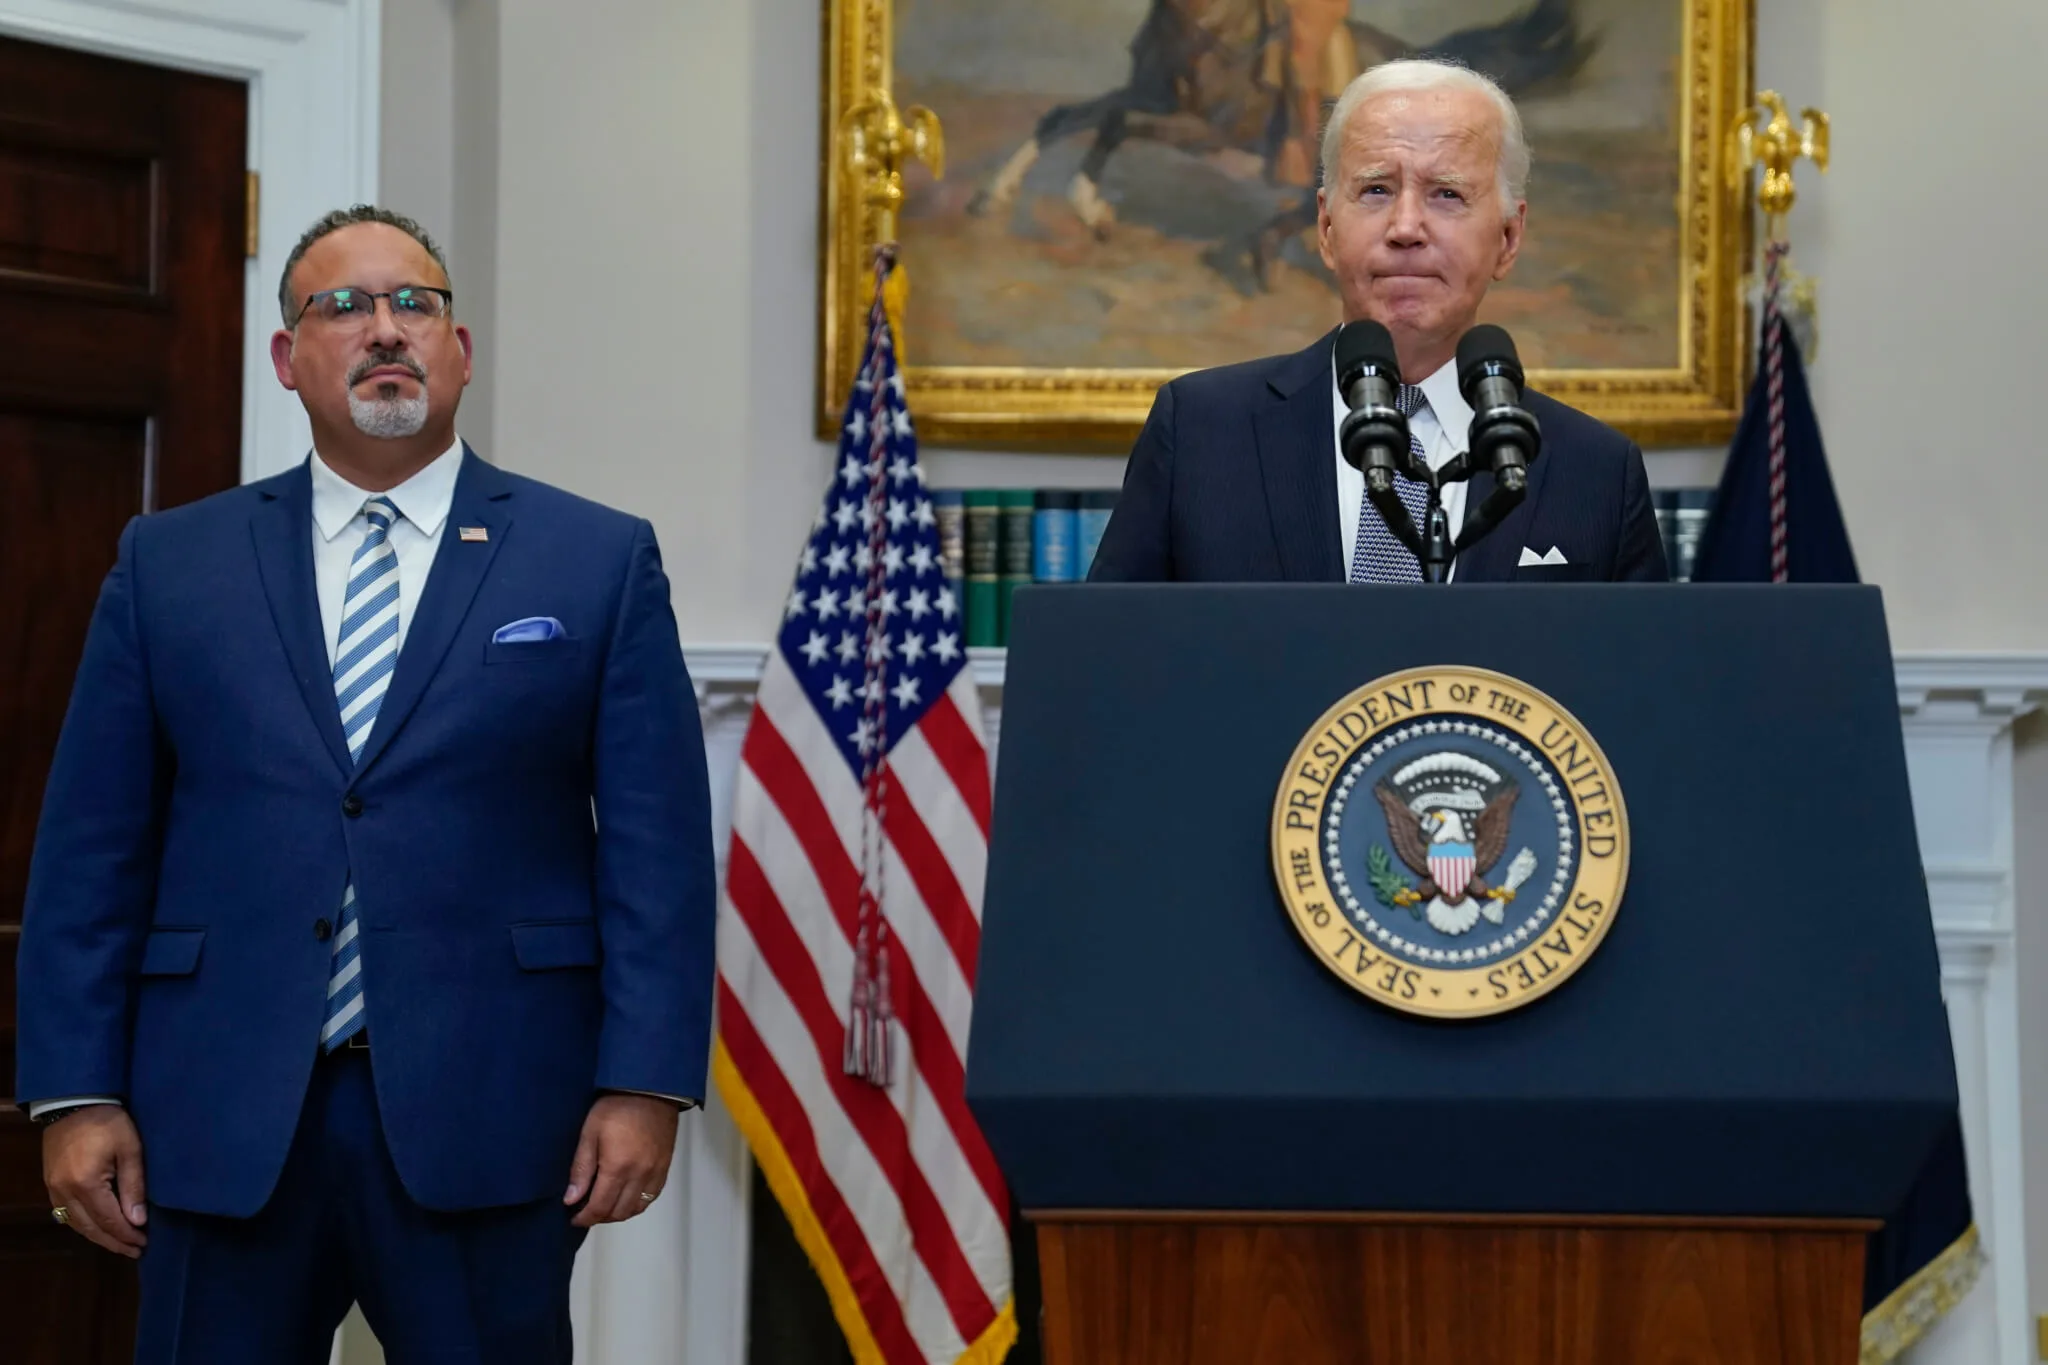 800,000 Borrowers to Get Student Debt Canceled, Biden Administration Announces